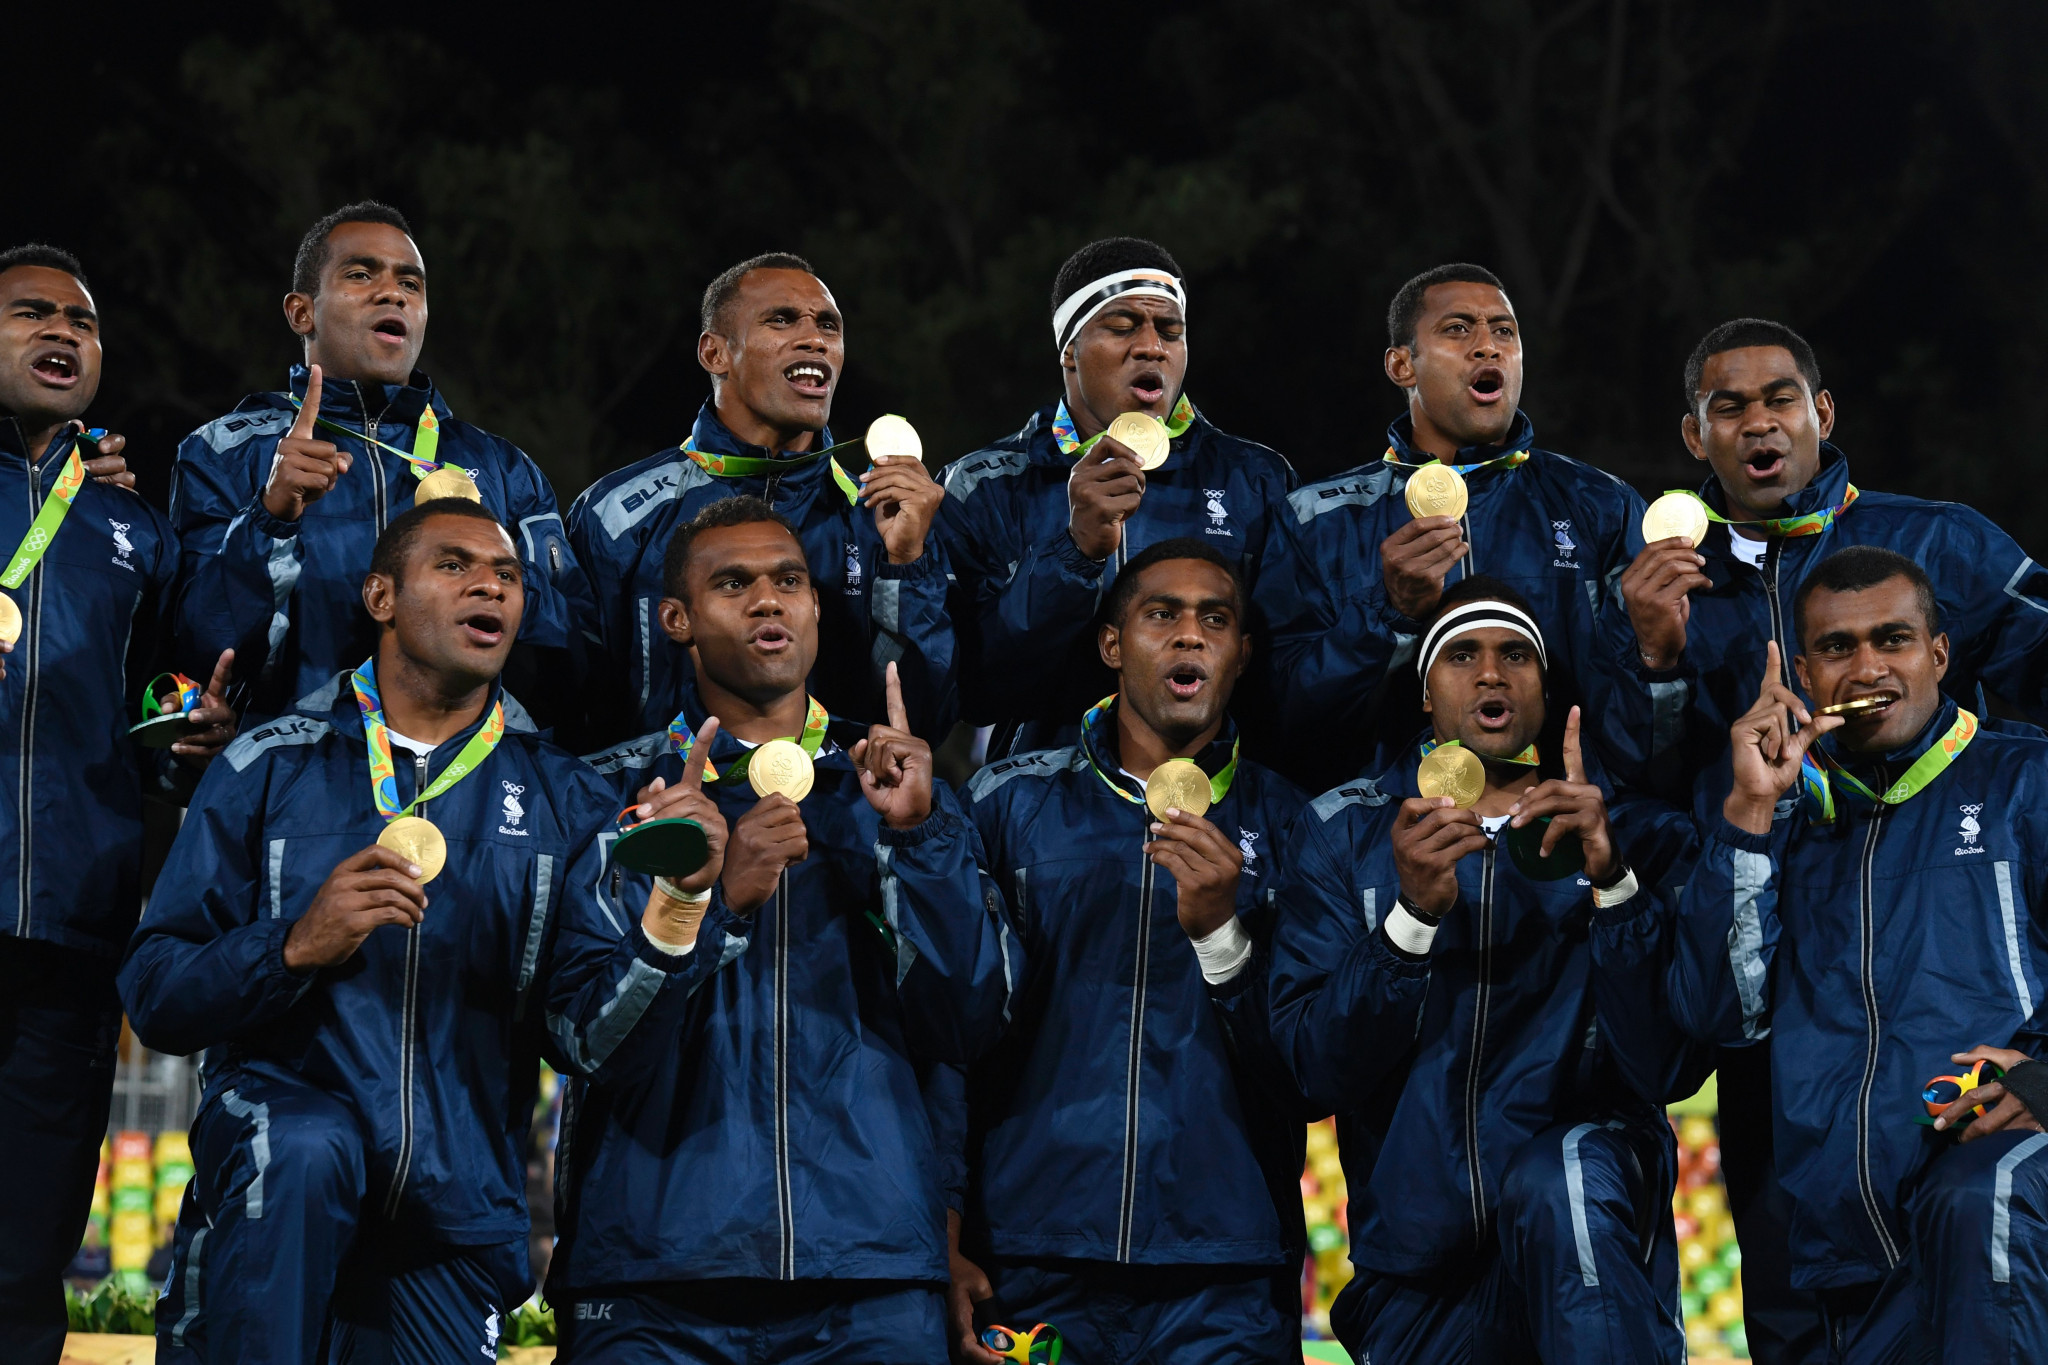 Fiji's rugby sevens team earned the country's first Olympic gold at Rio 2016 ©Getty Images